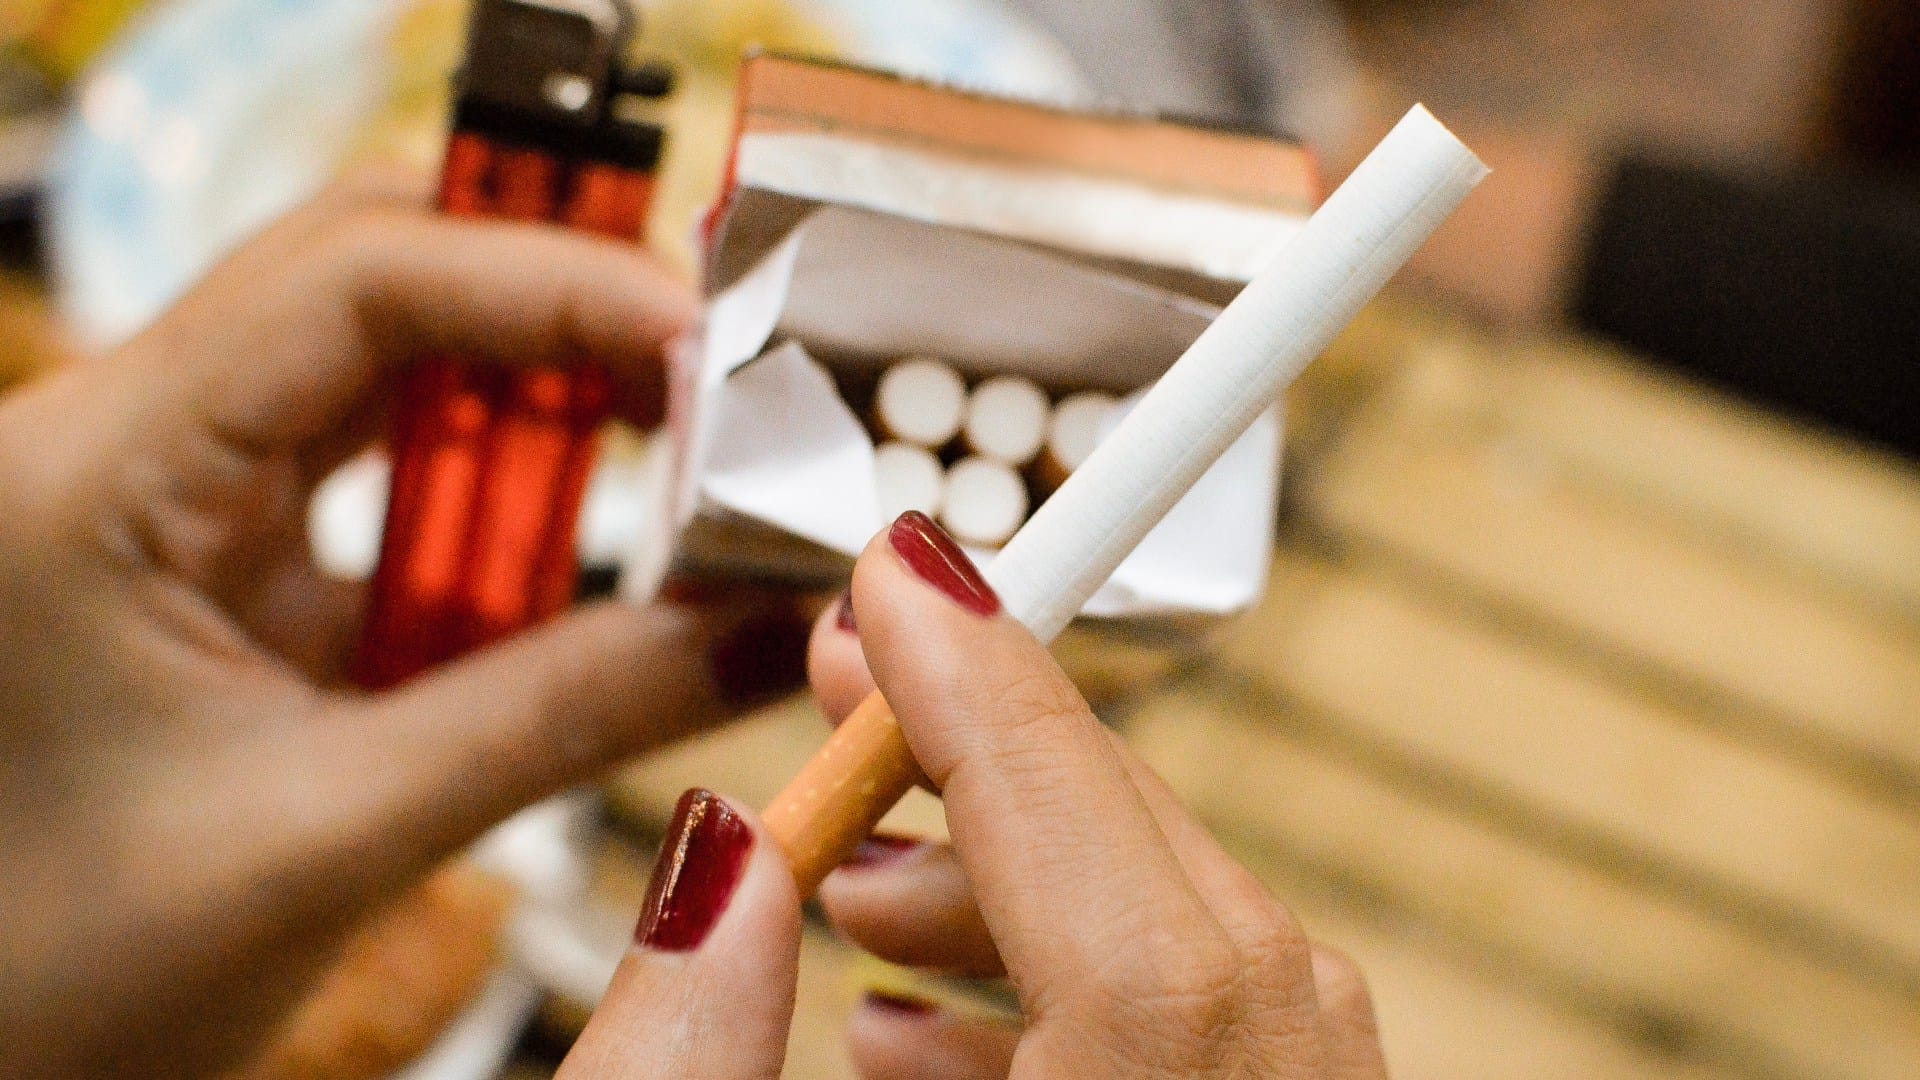 Price of cigarettes to rise from TONIGHT in huge blow to smokers, Autumn Statement confirms